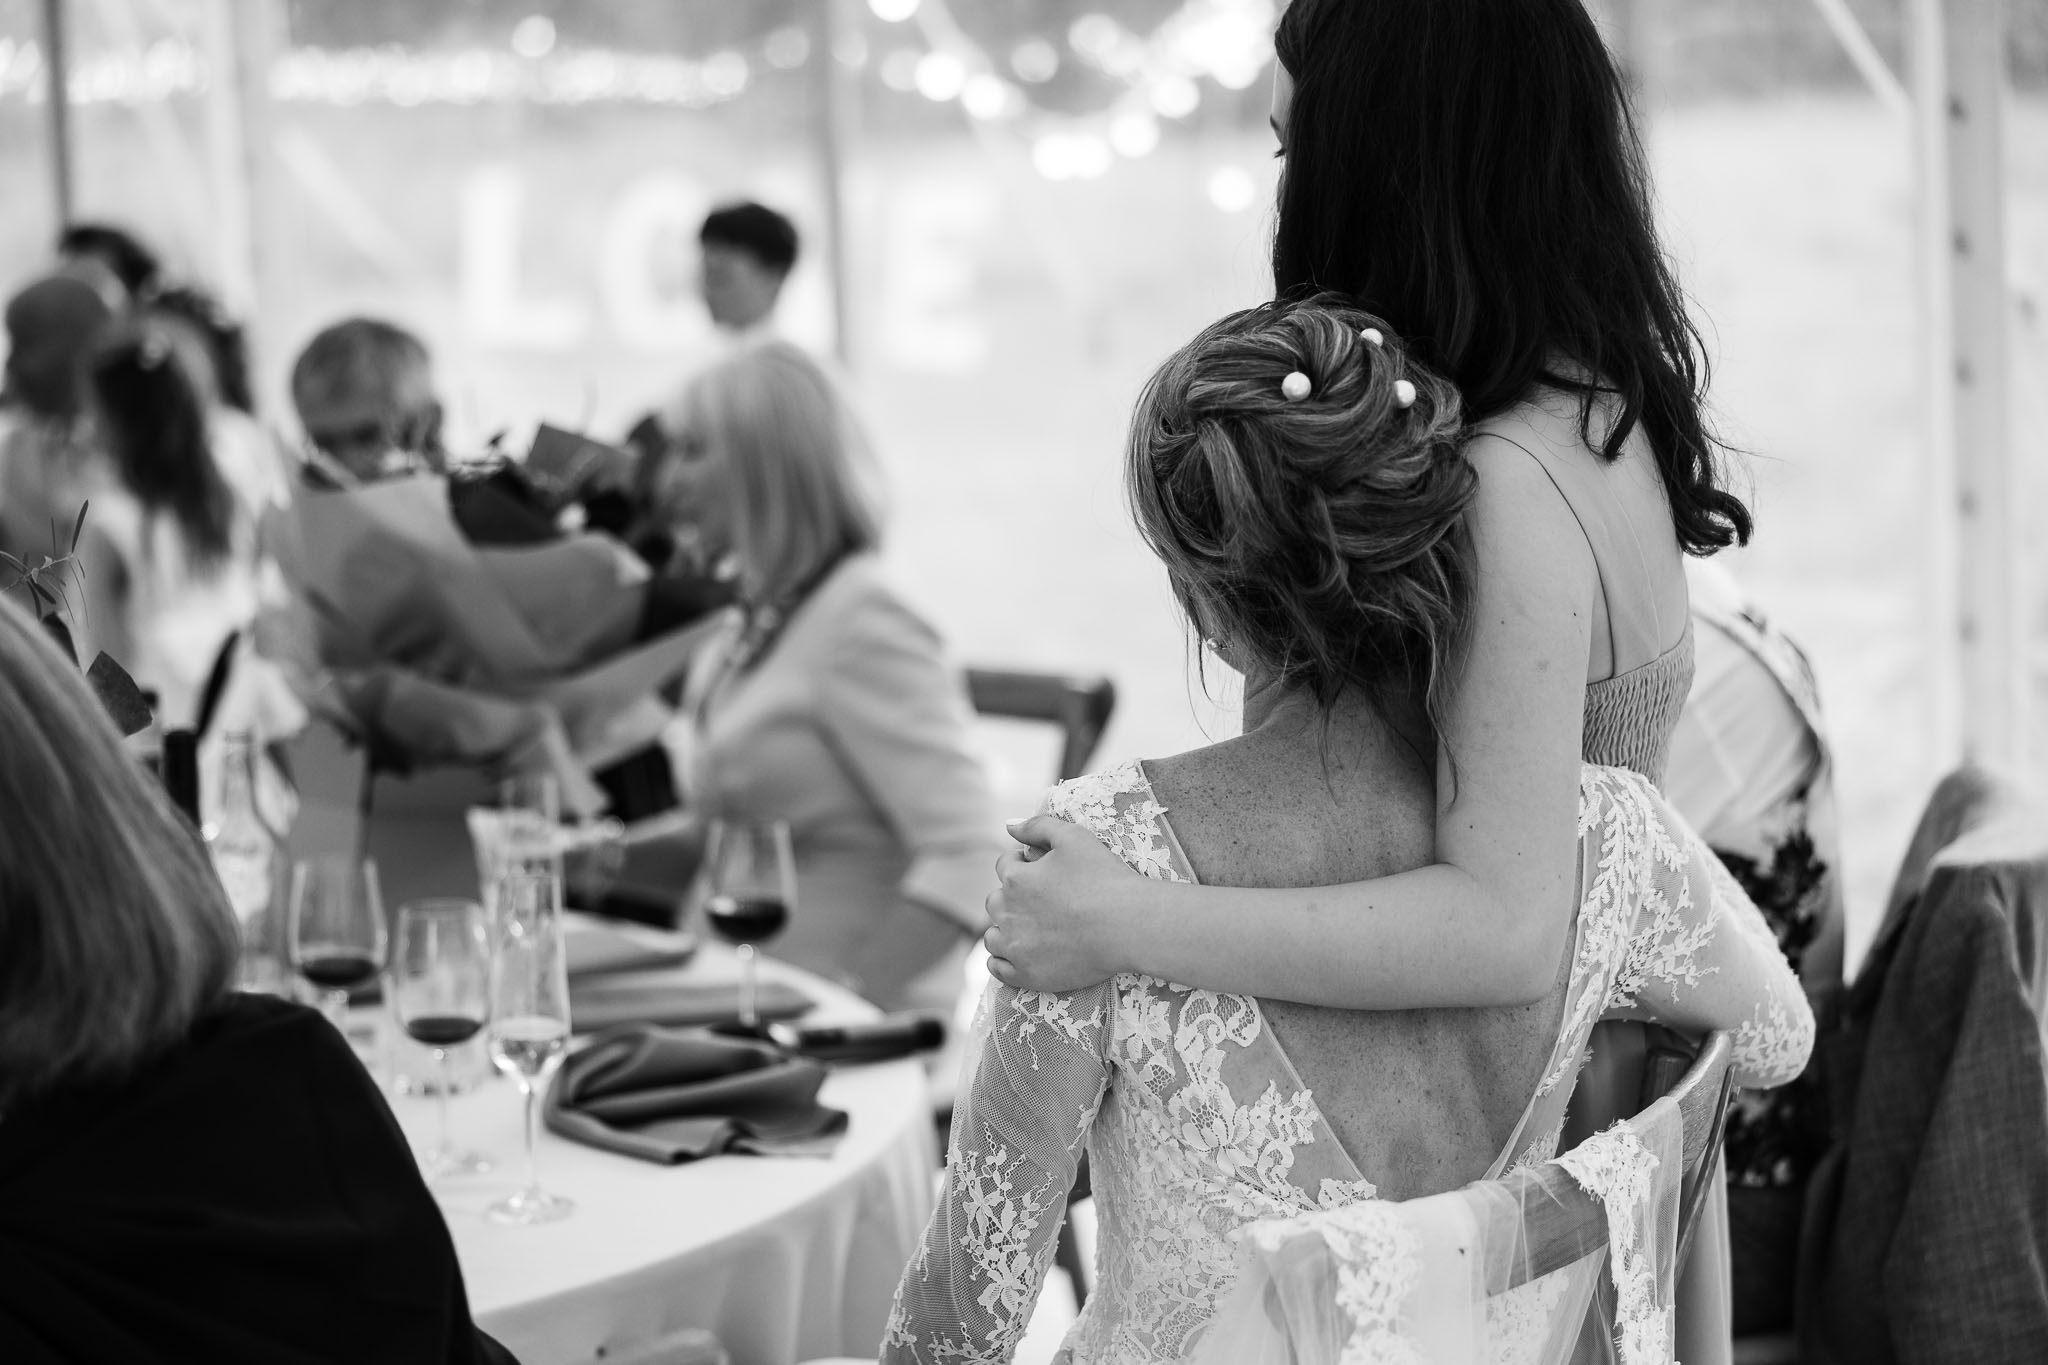 Mum bride and daughter on wedding day hugging 